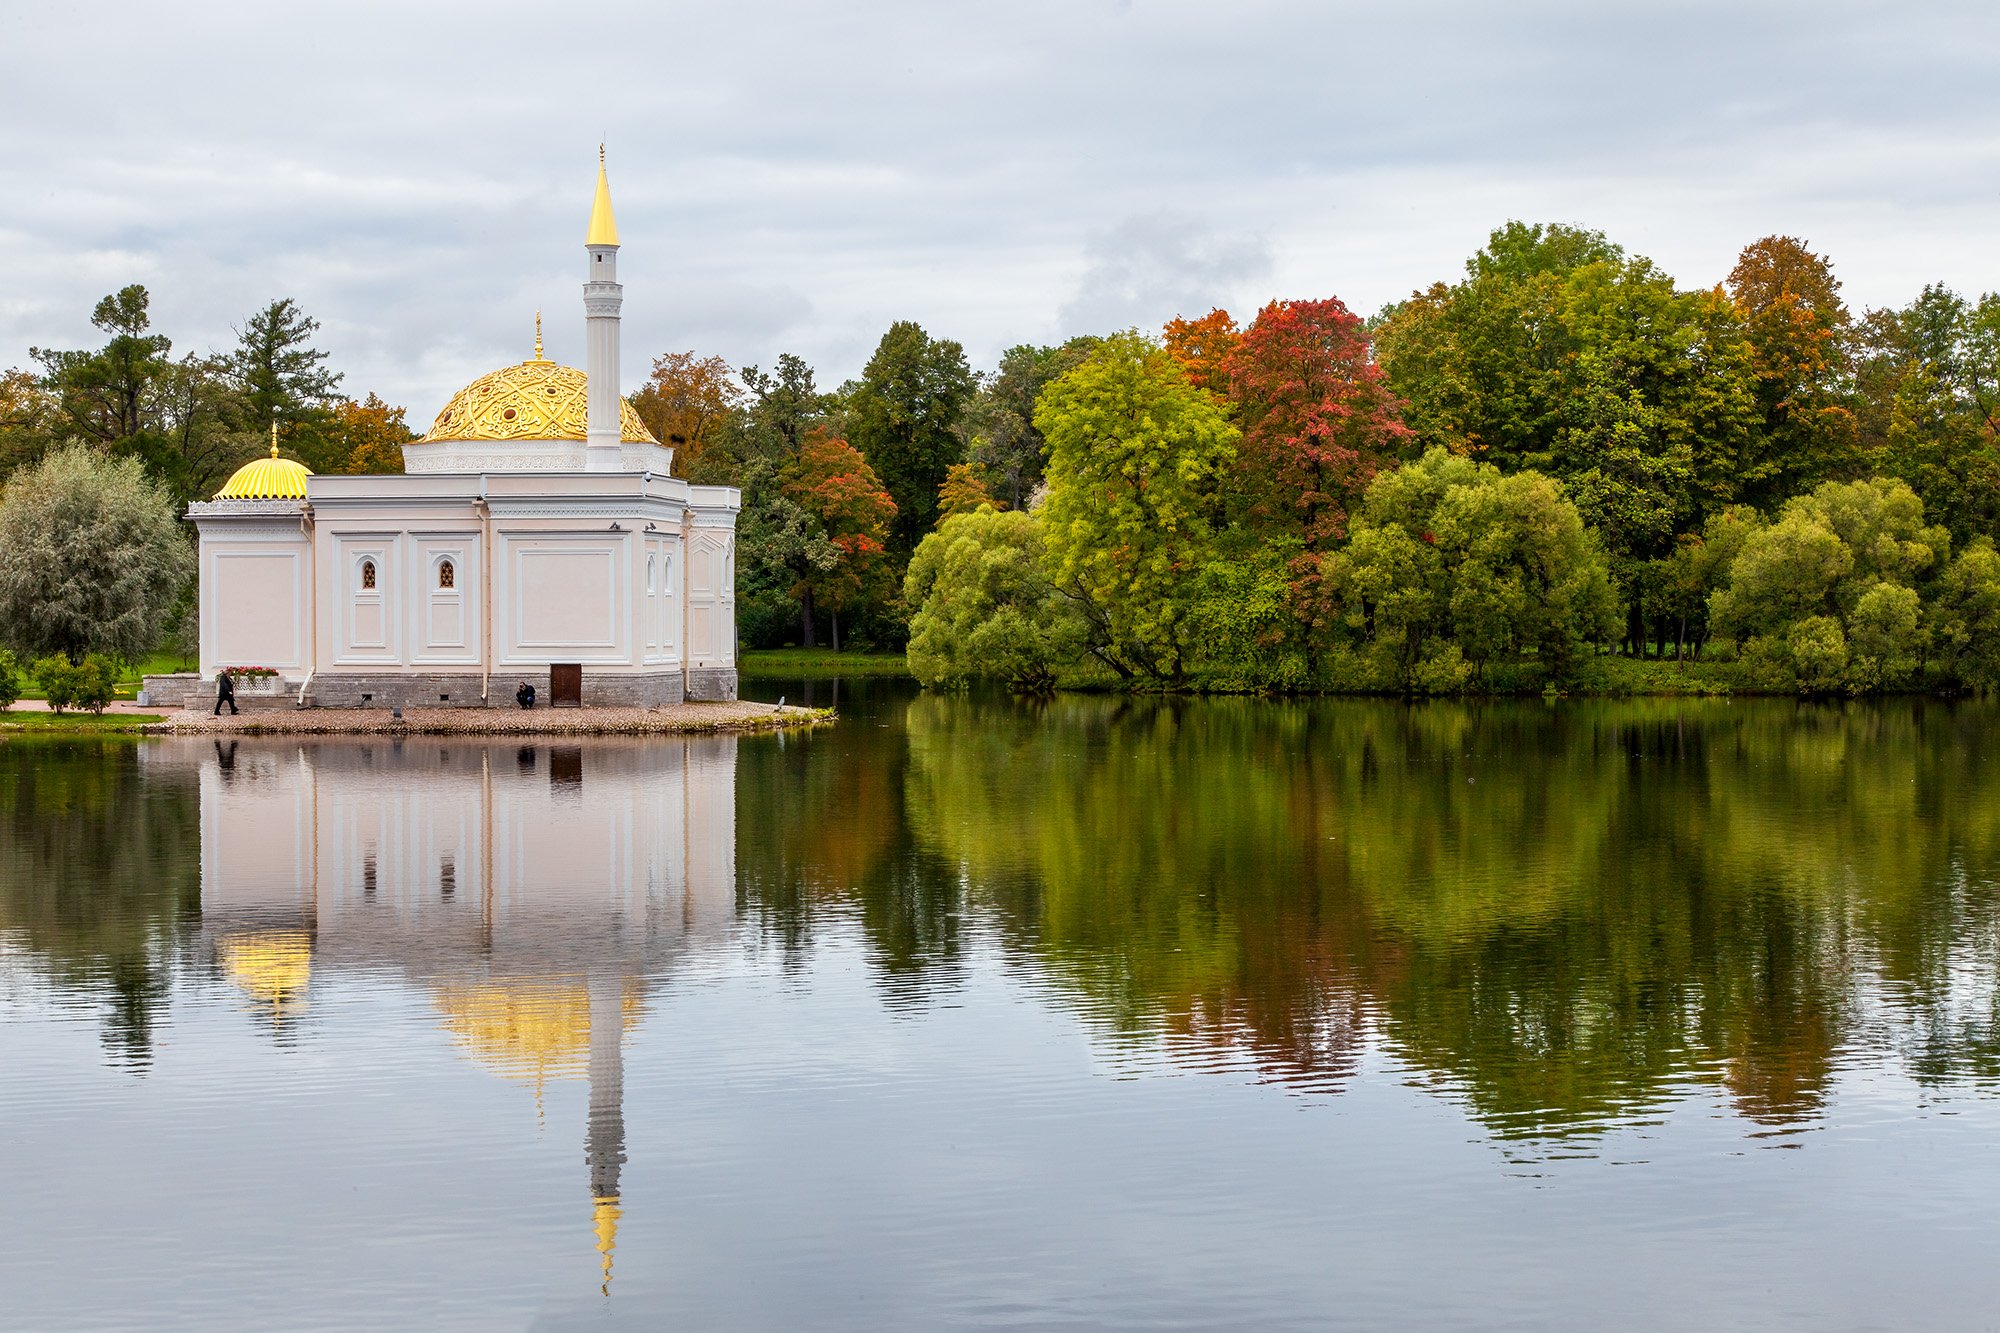 In this photograph, I captured the Mosque & Turkish Bath Pavilion in St. Petersburg, Russia. The mosque stands gracefully on...